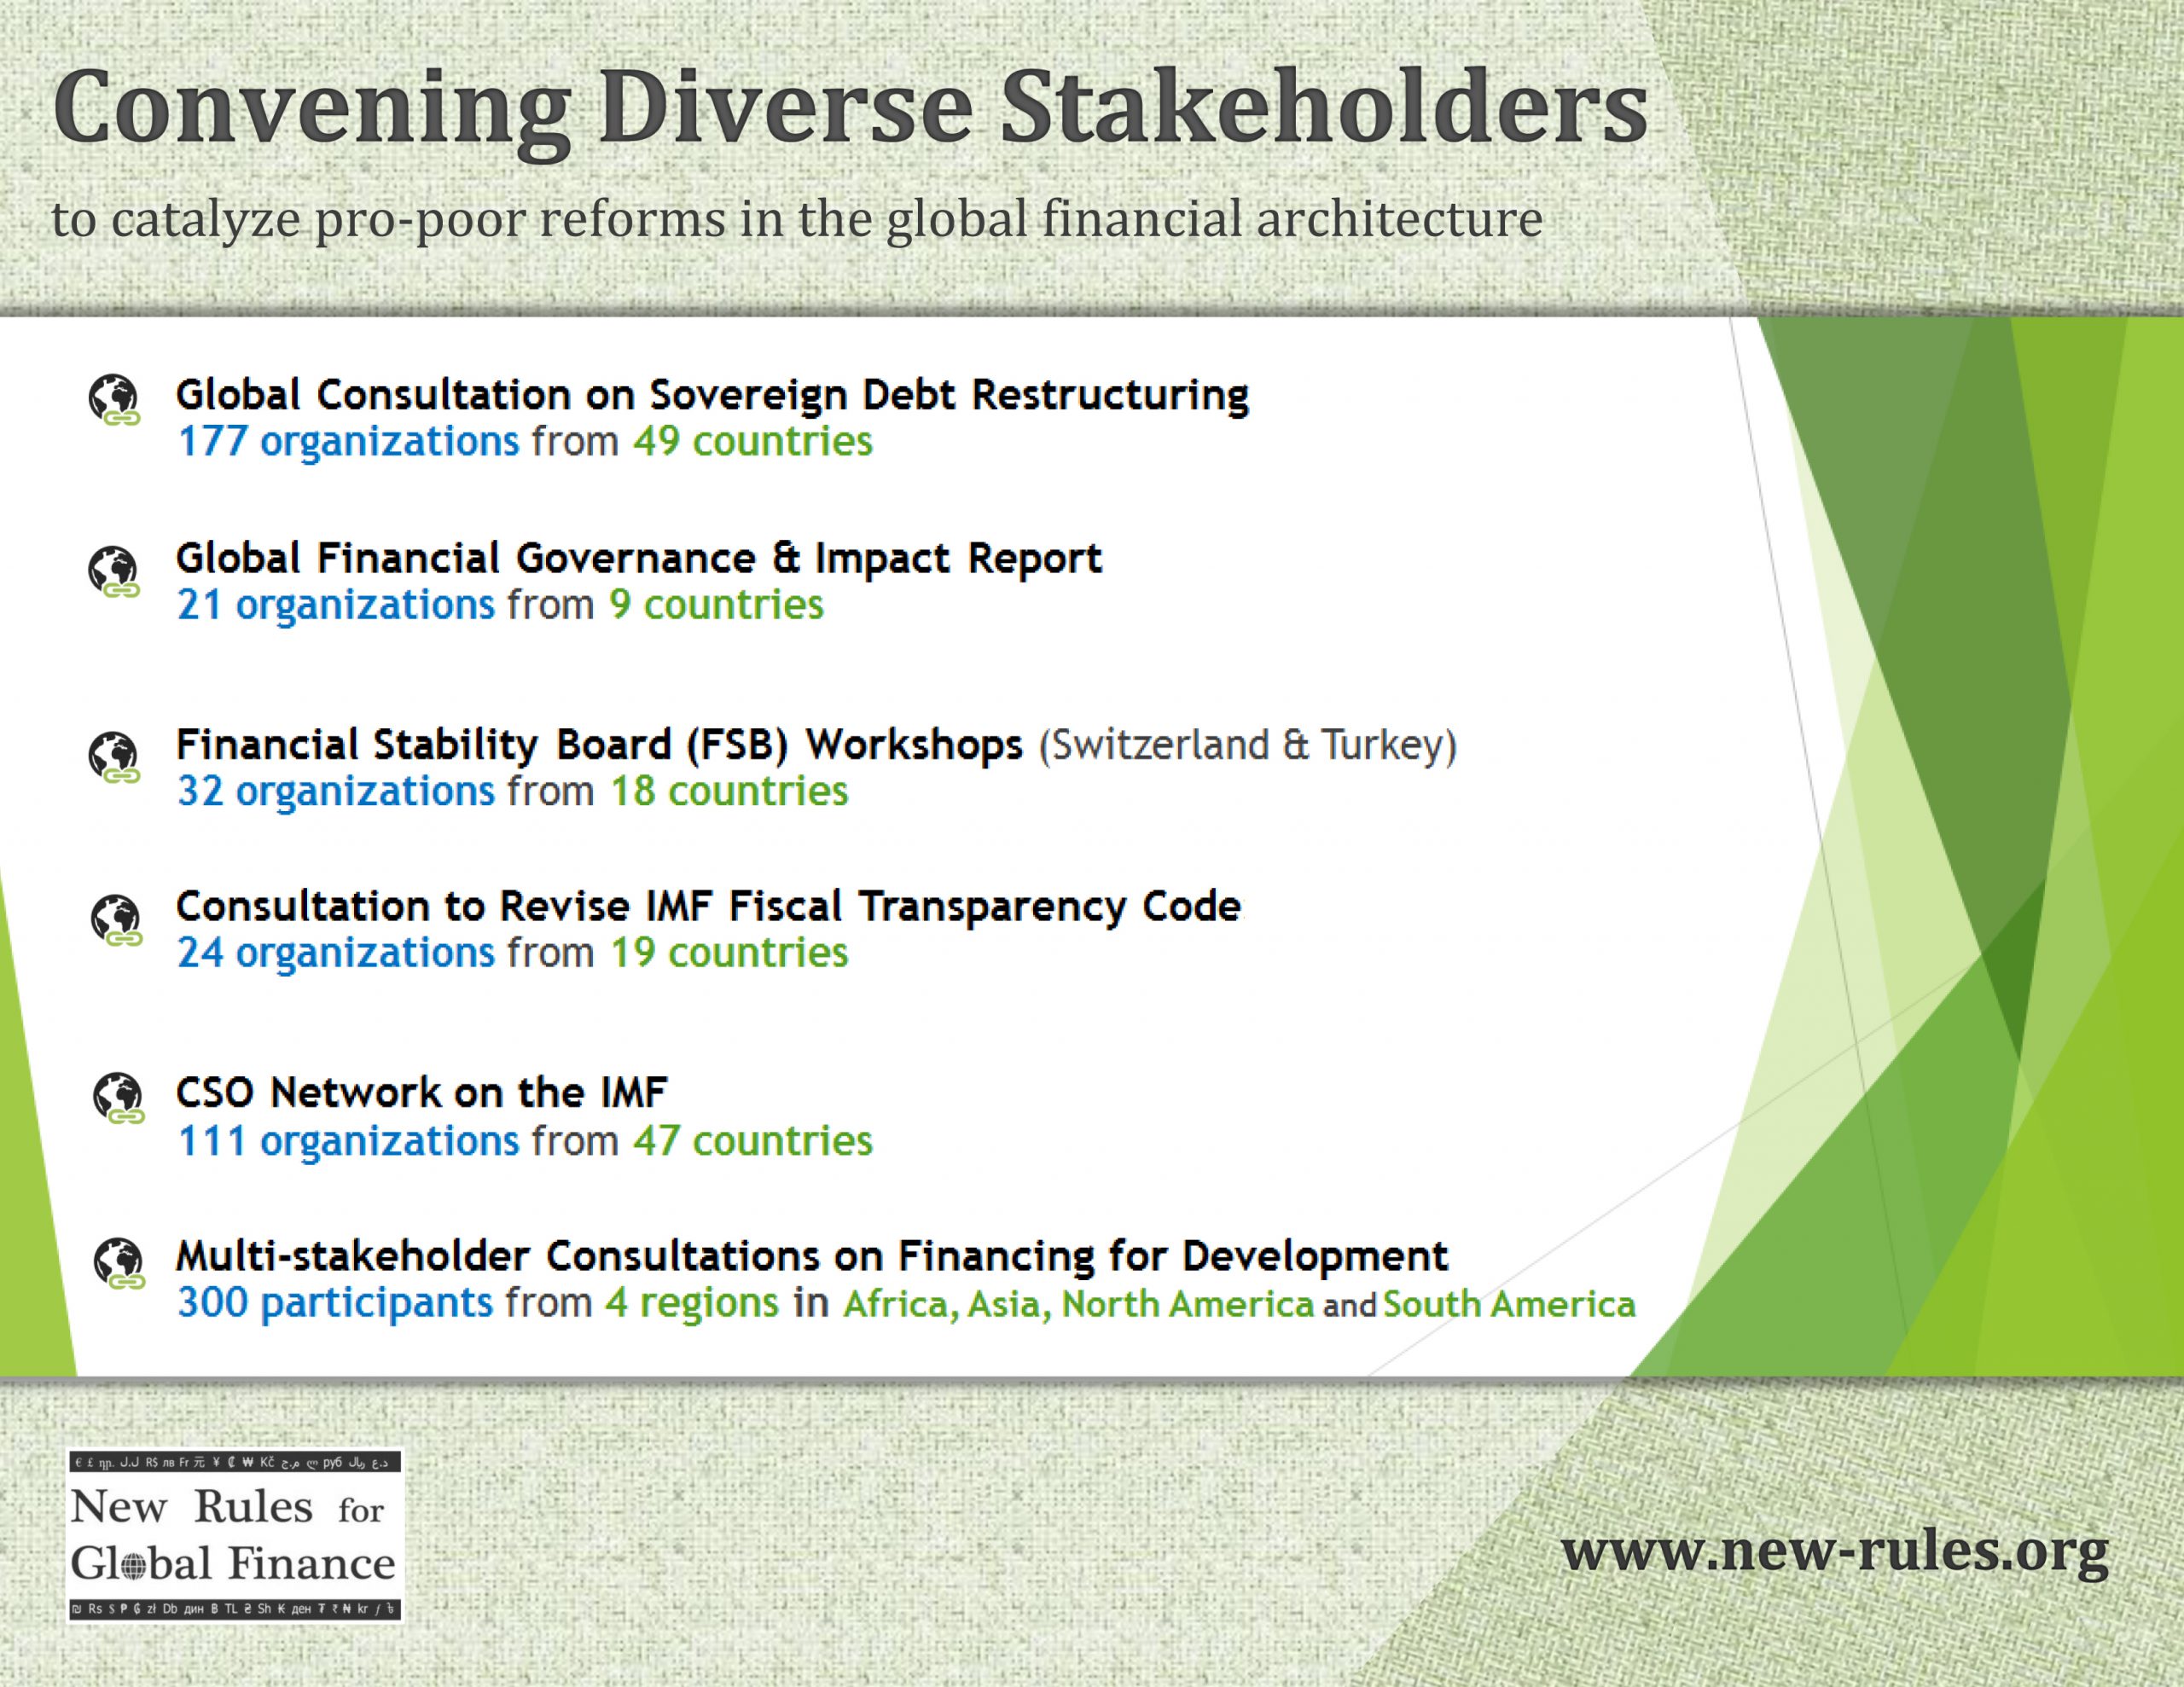 New Rules - Convening Diverse Stakeholders